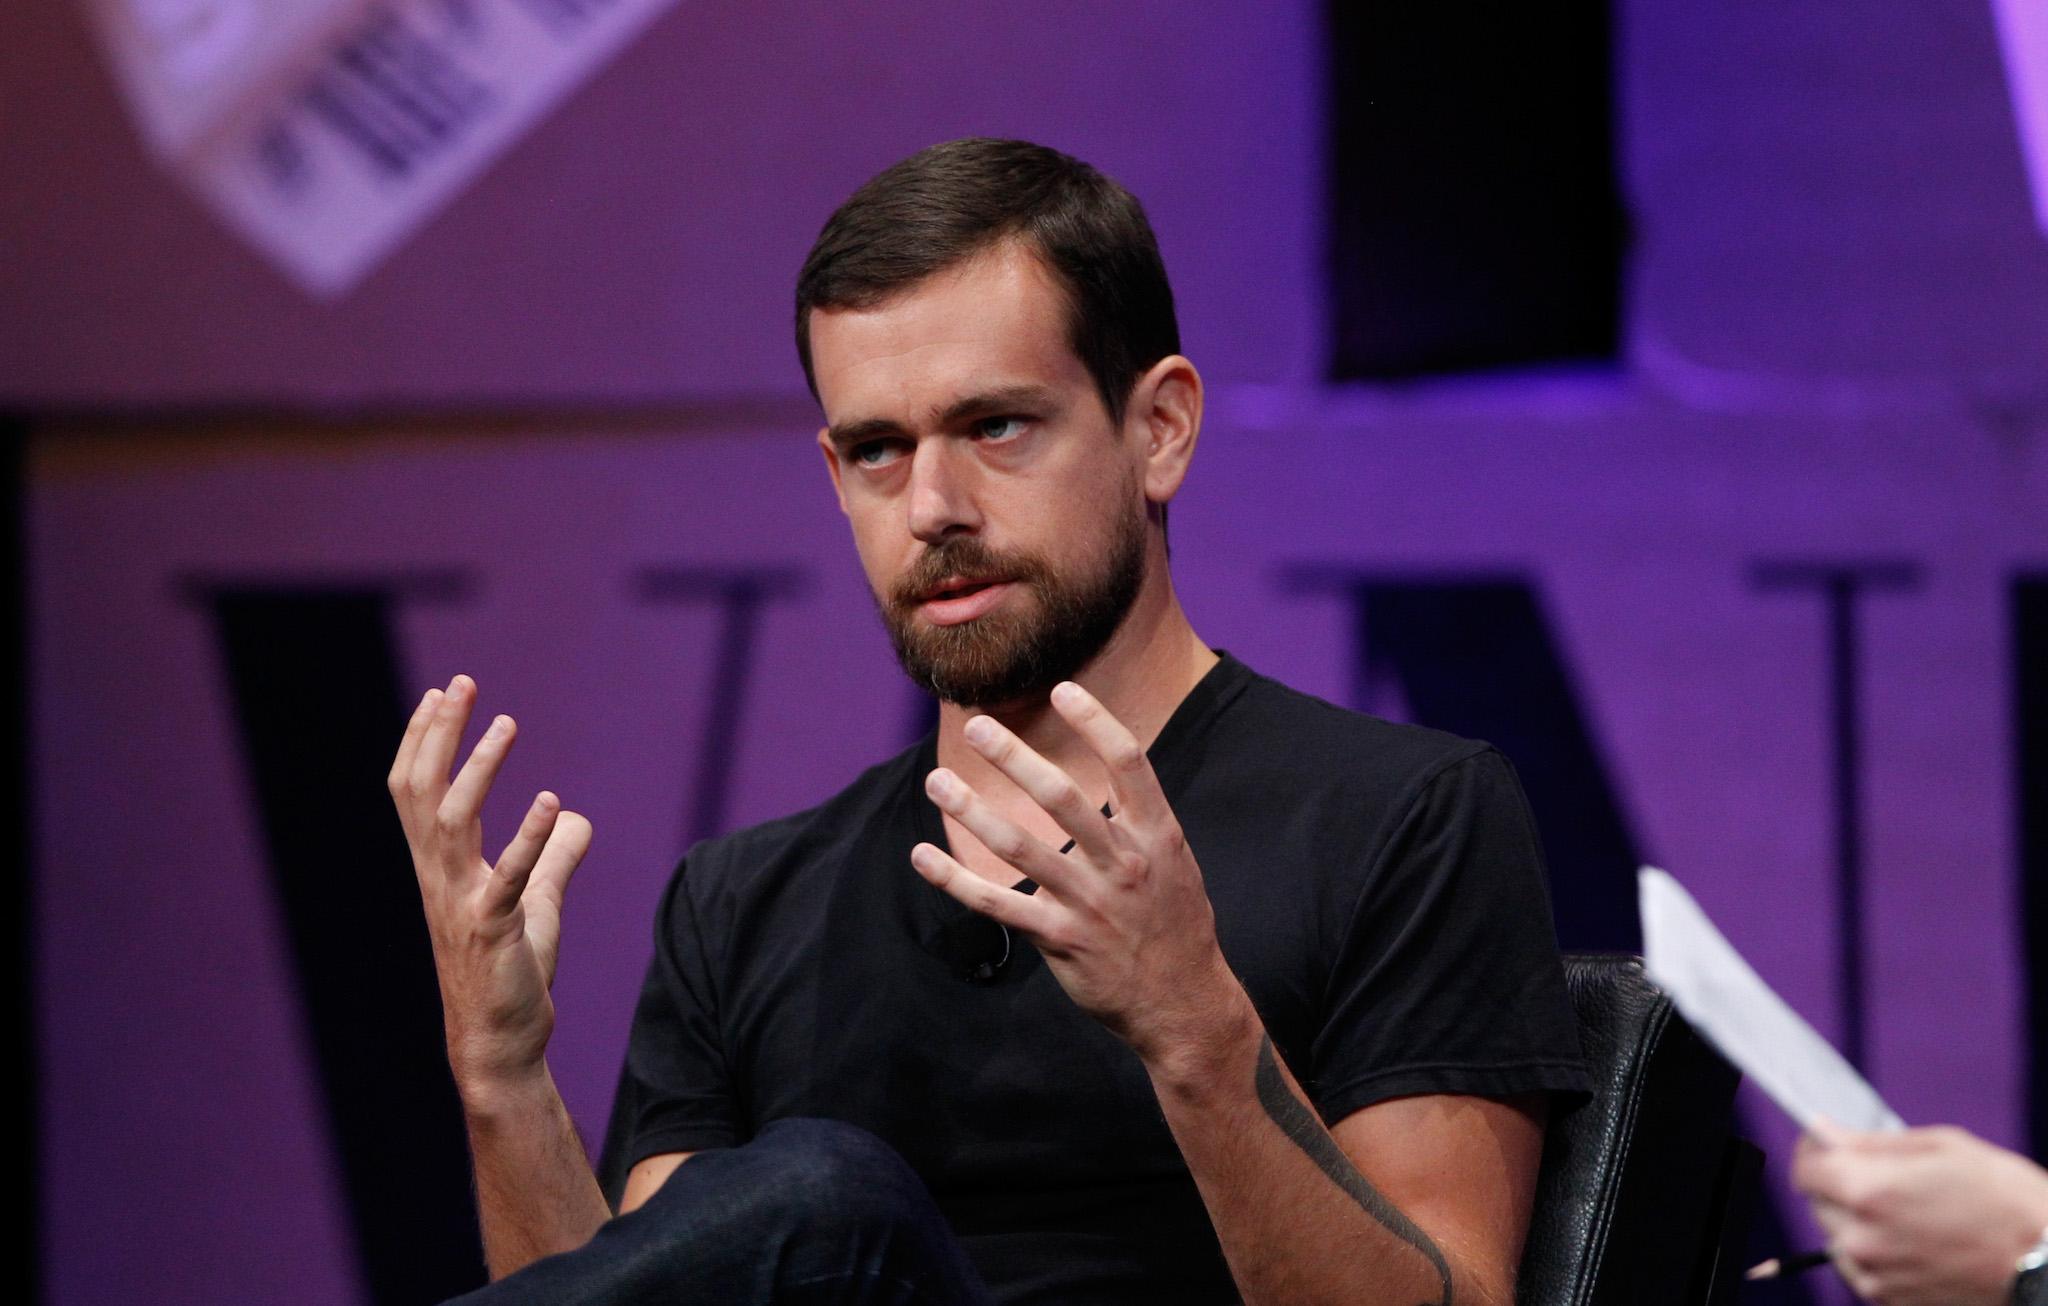 Twitter Co-Founder and Chairman and Square CEO Jack Dorsey speaks onstage during 'From 7 Dwarves to 140 Characters' at the Vanity Fair New Establishment Summit at Yerba Buena Center for the Arts on October 9, 2014 in San Francisco, California